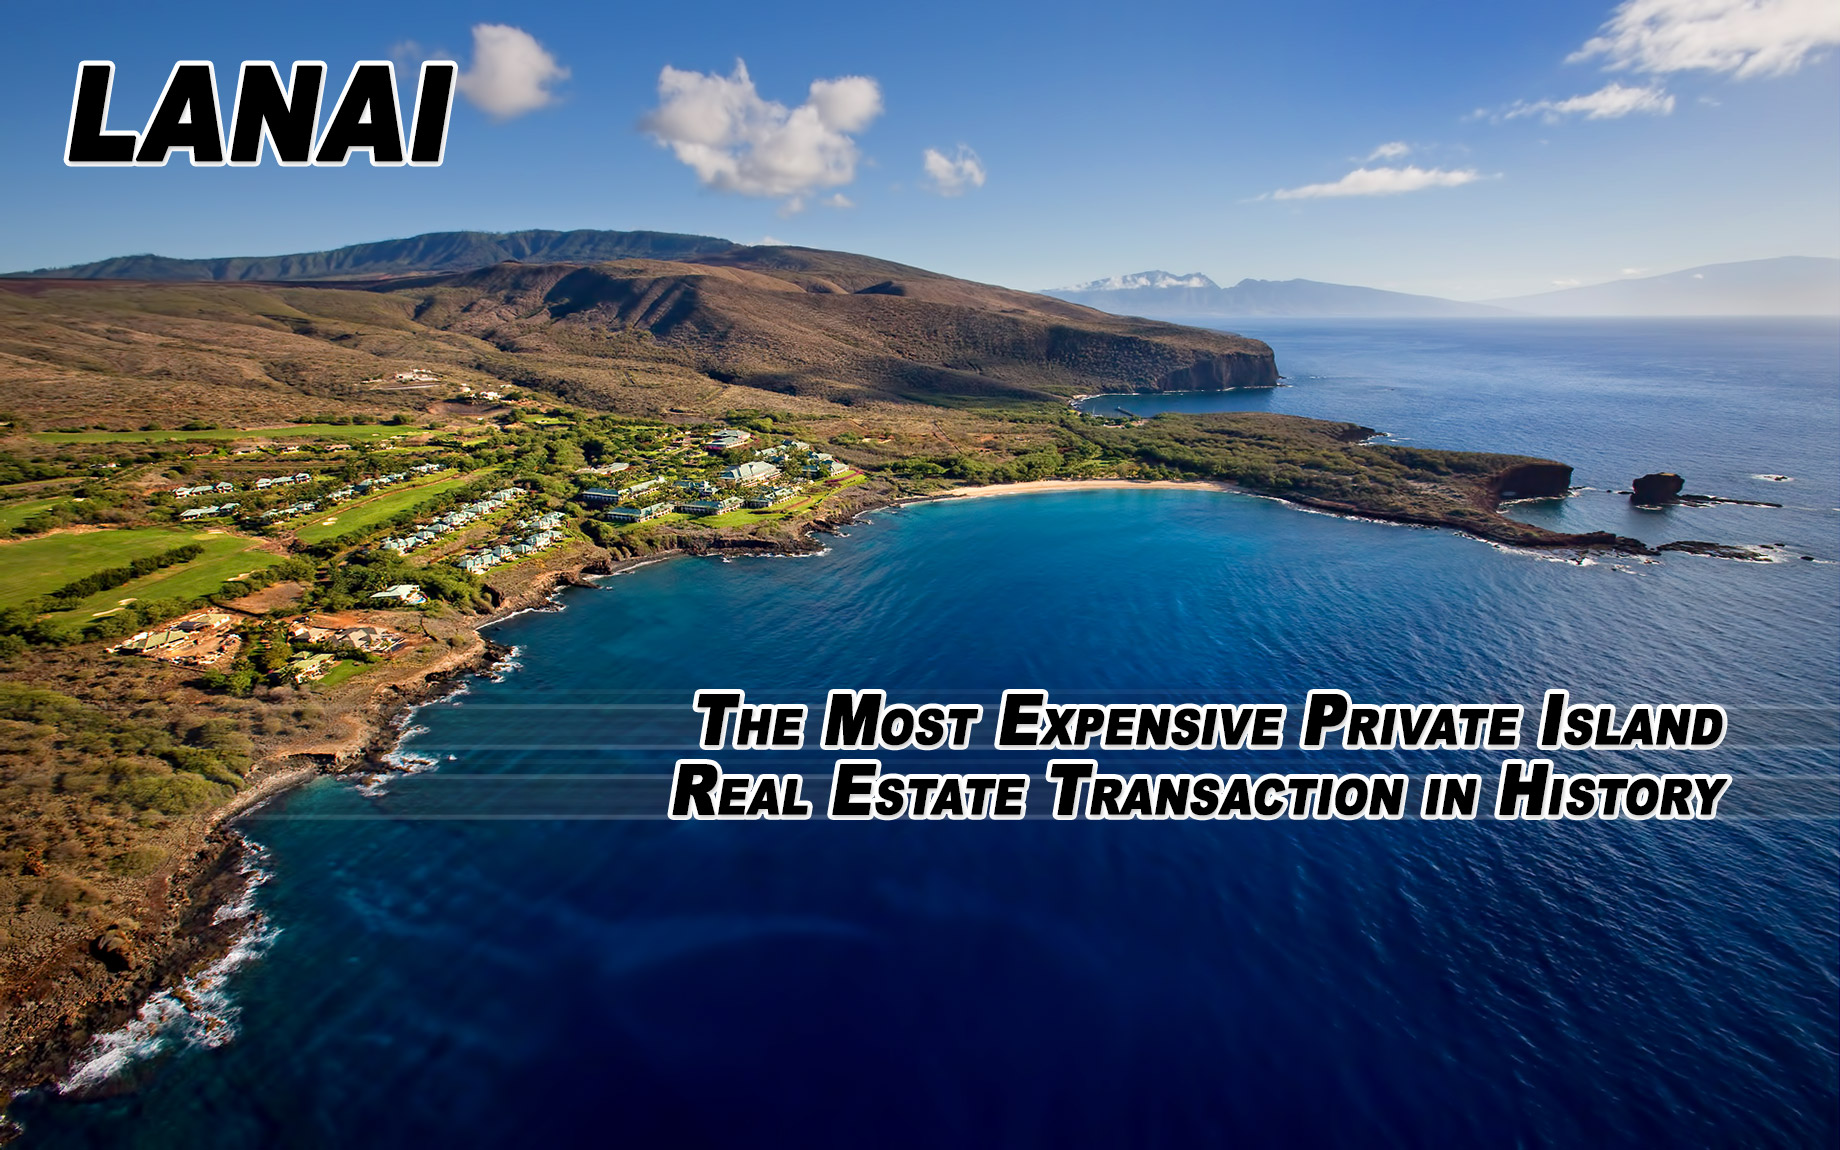 Lanai – The Most Expensive Private Island Real Estate Transaction in History